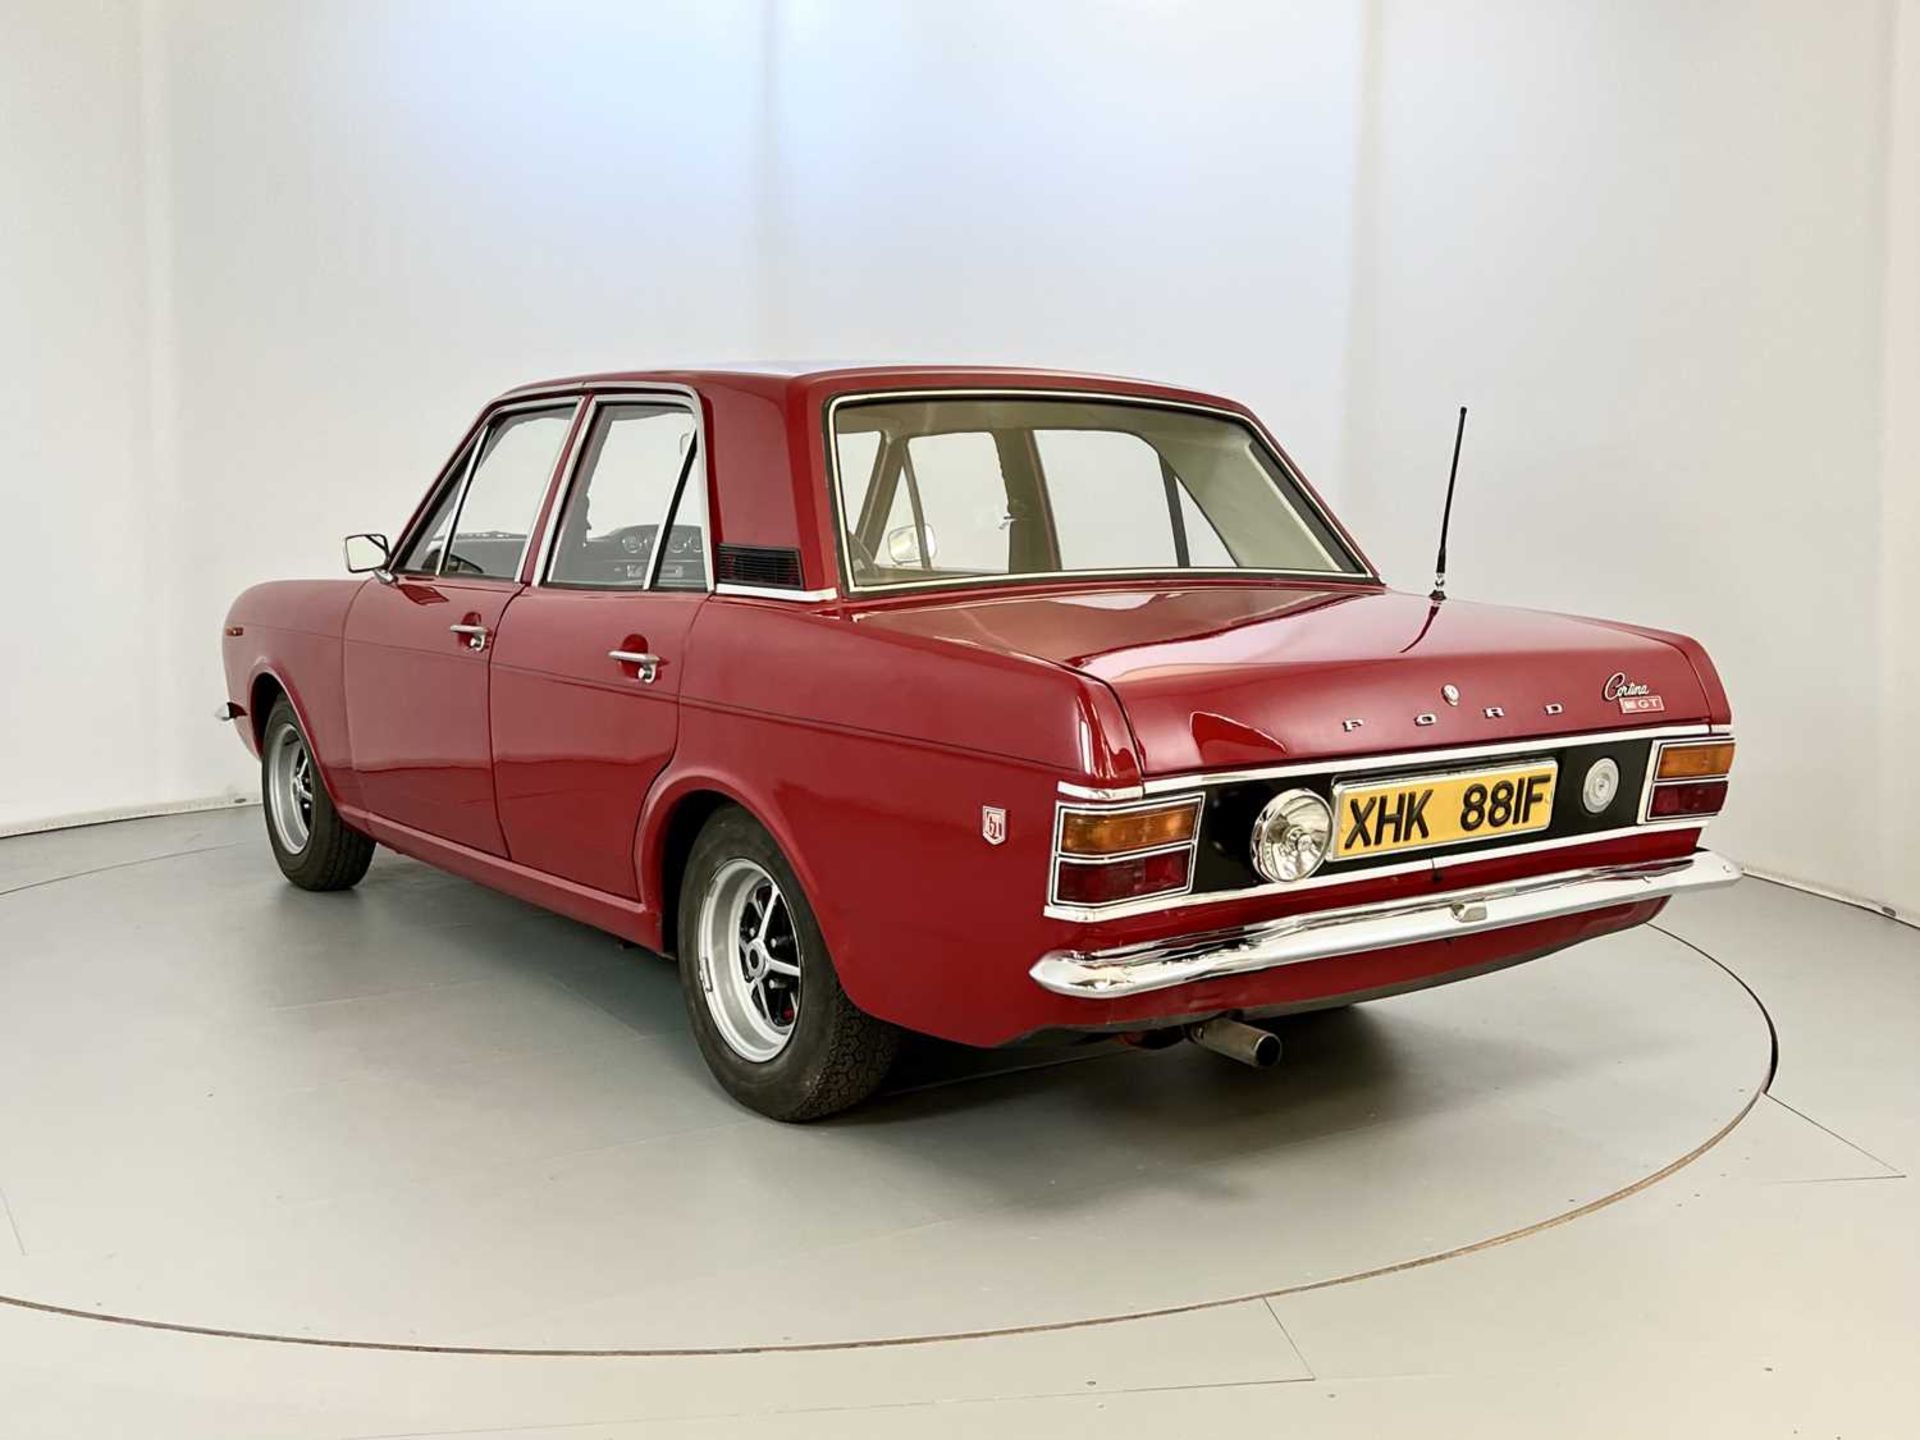 1967 Ford Cortina 1600GT - Image 7 of 37